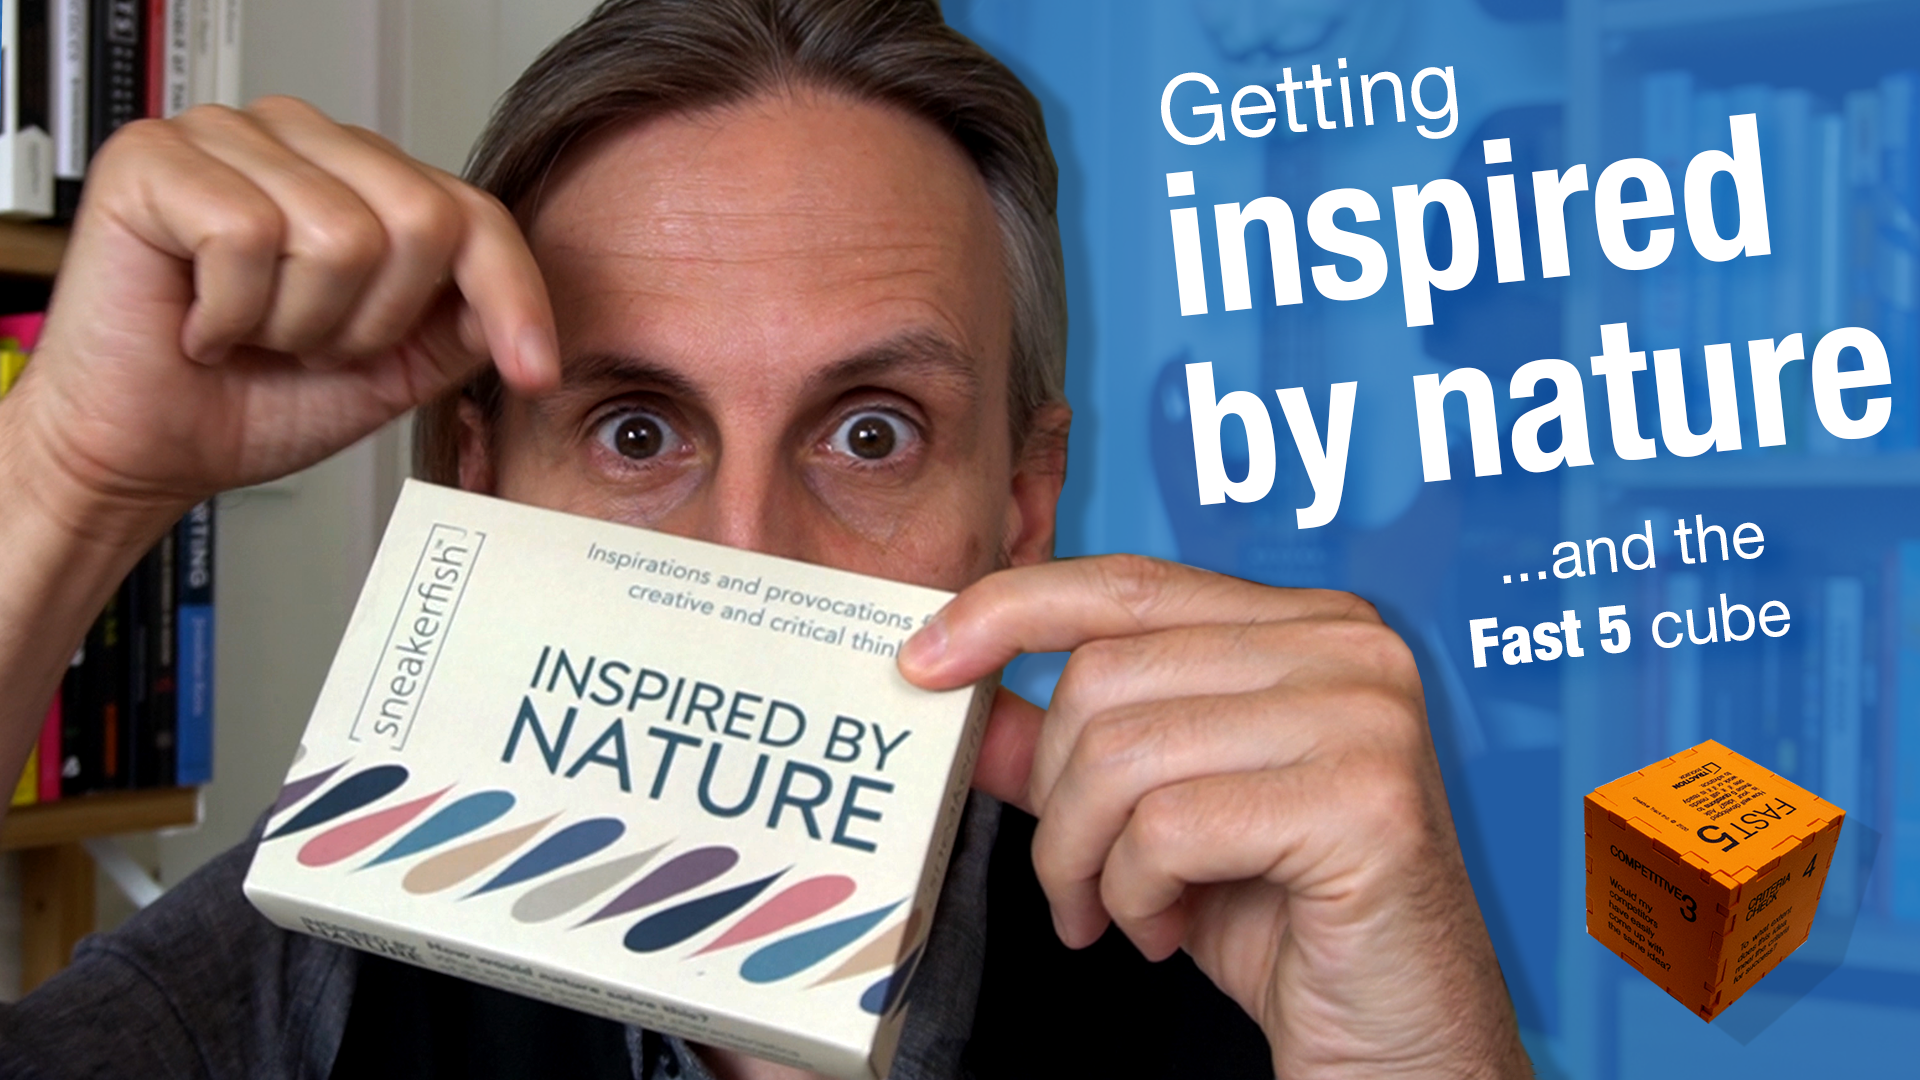 Getting inspired by Nature – Inspirations and provocations to help you innovate beyond the obvious